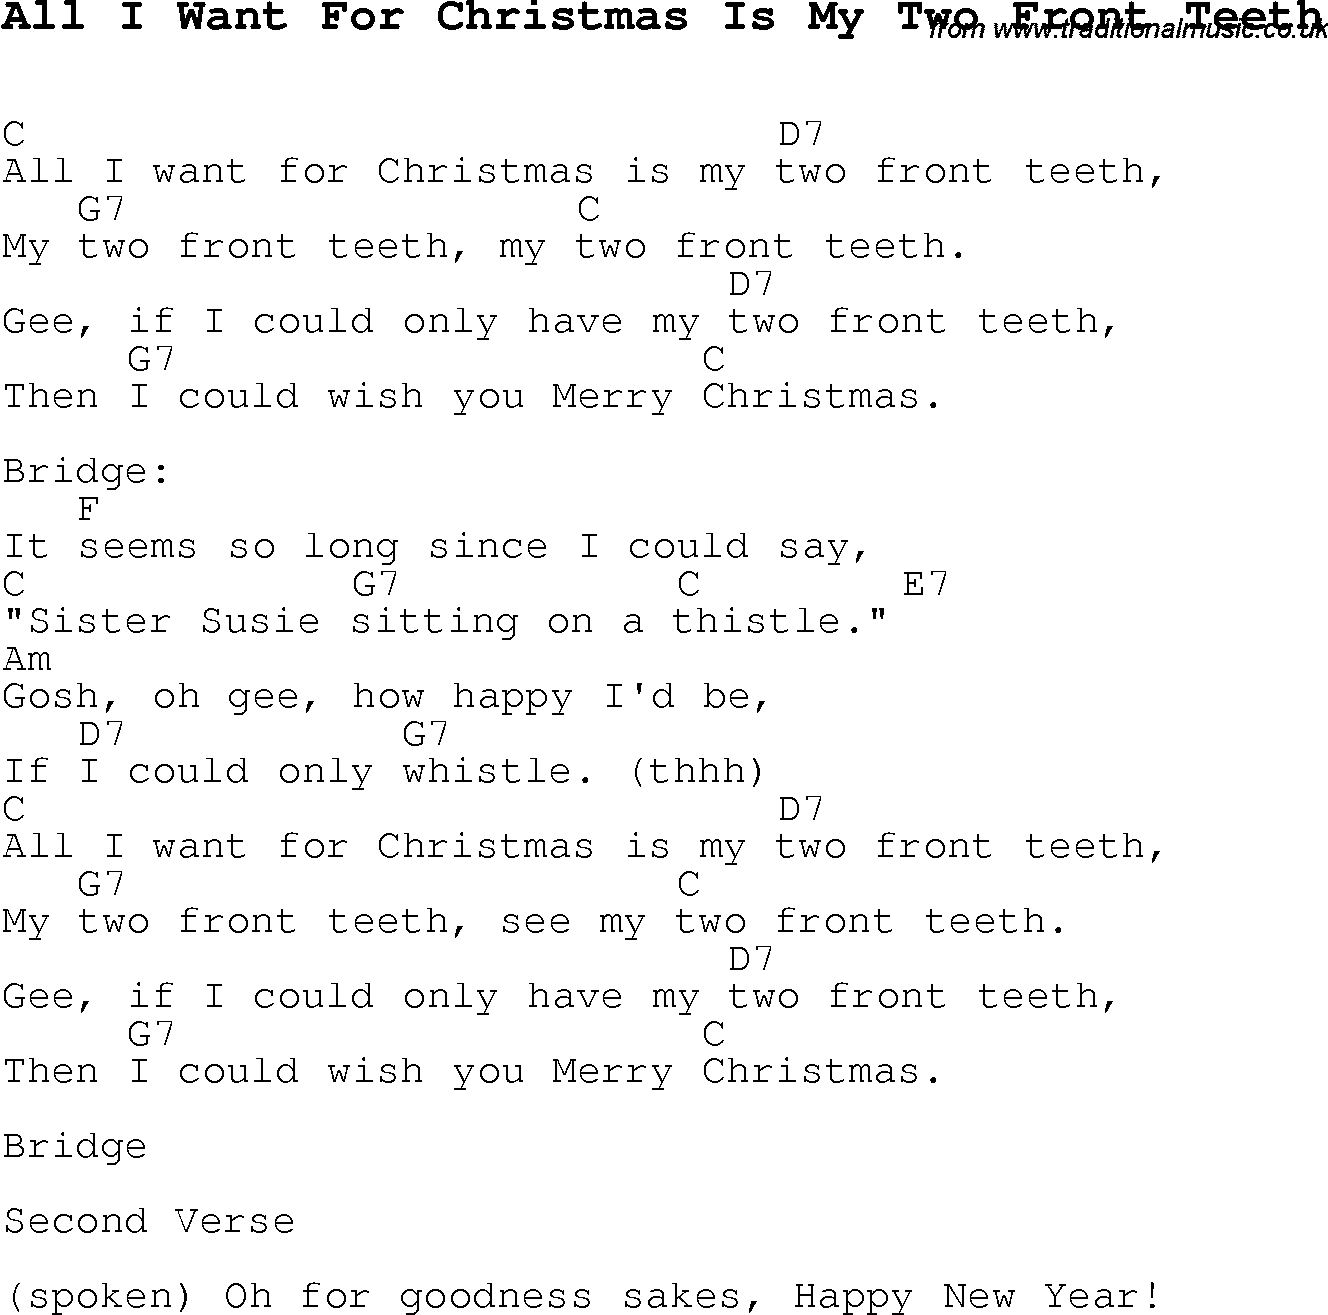 Christmas Songs and Carols, lyrics with chords for guitar banjo for All I Want For Christmas Is My Two Front Teeth